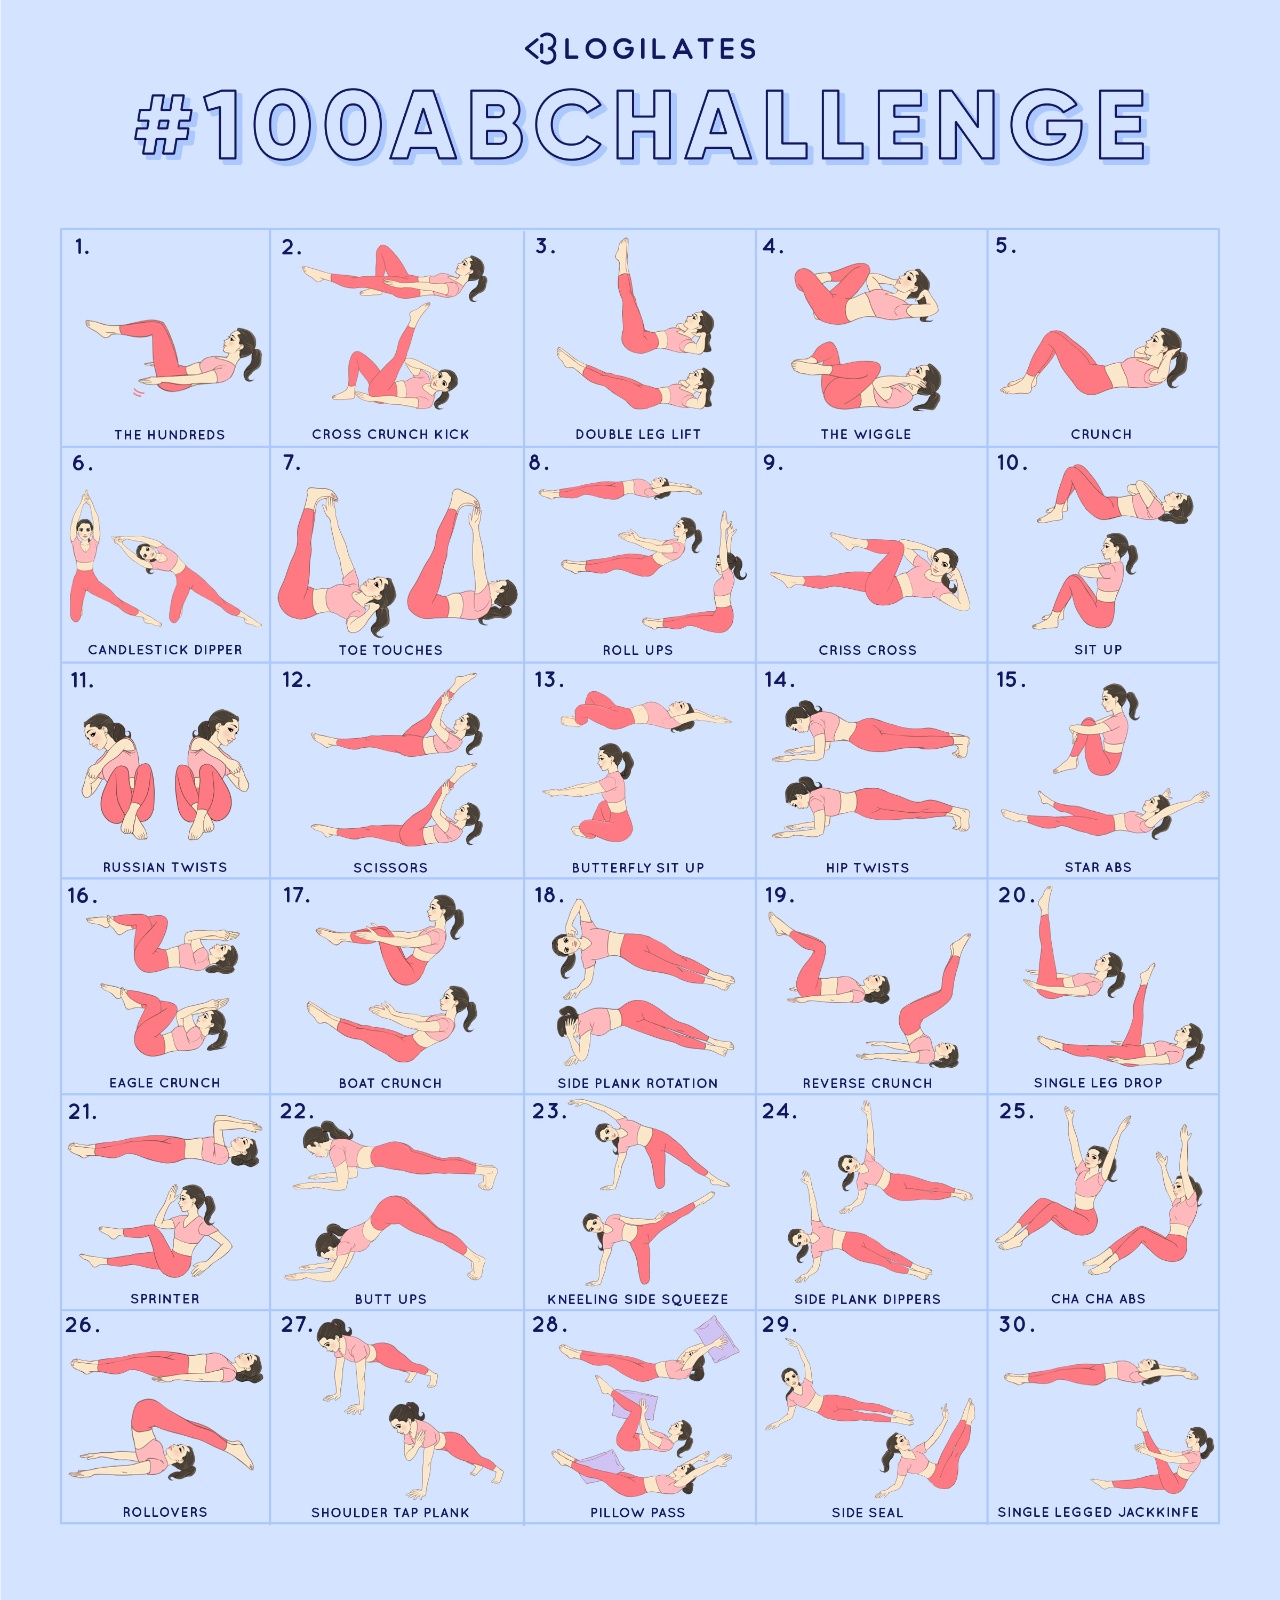 100 Ab Challenge. You in? - Blogilates